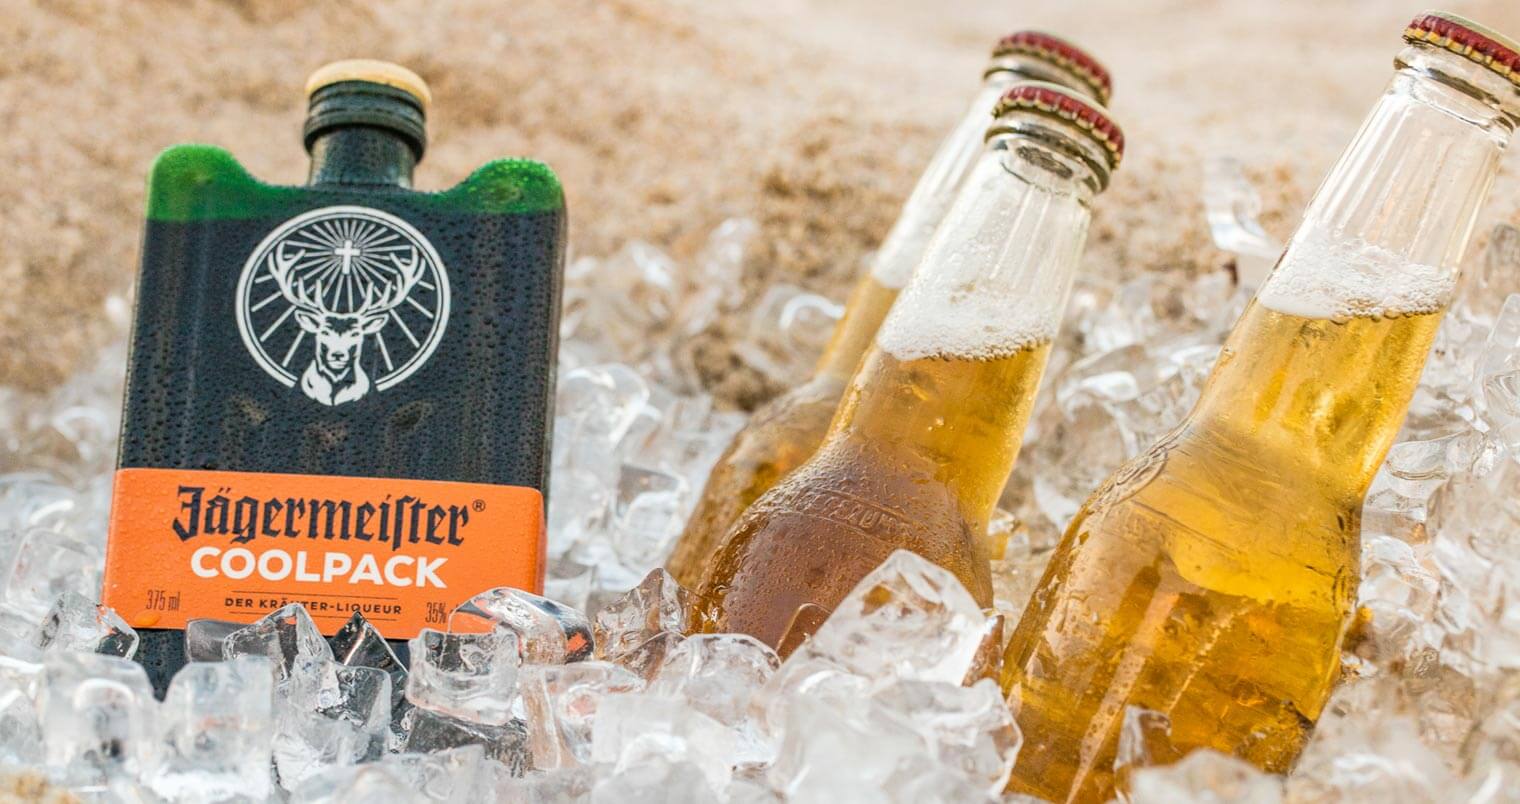 Jägermeister Coolpack, bottles and plastic glass in cooler with ice, featured image